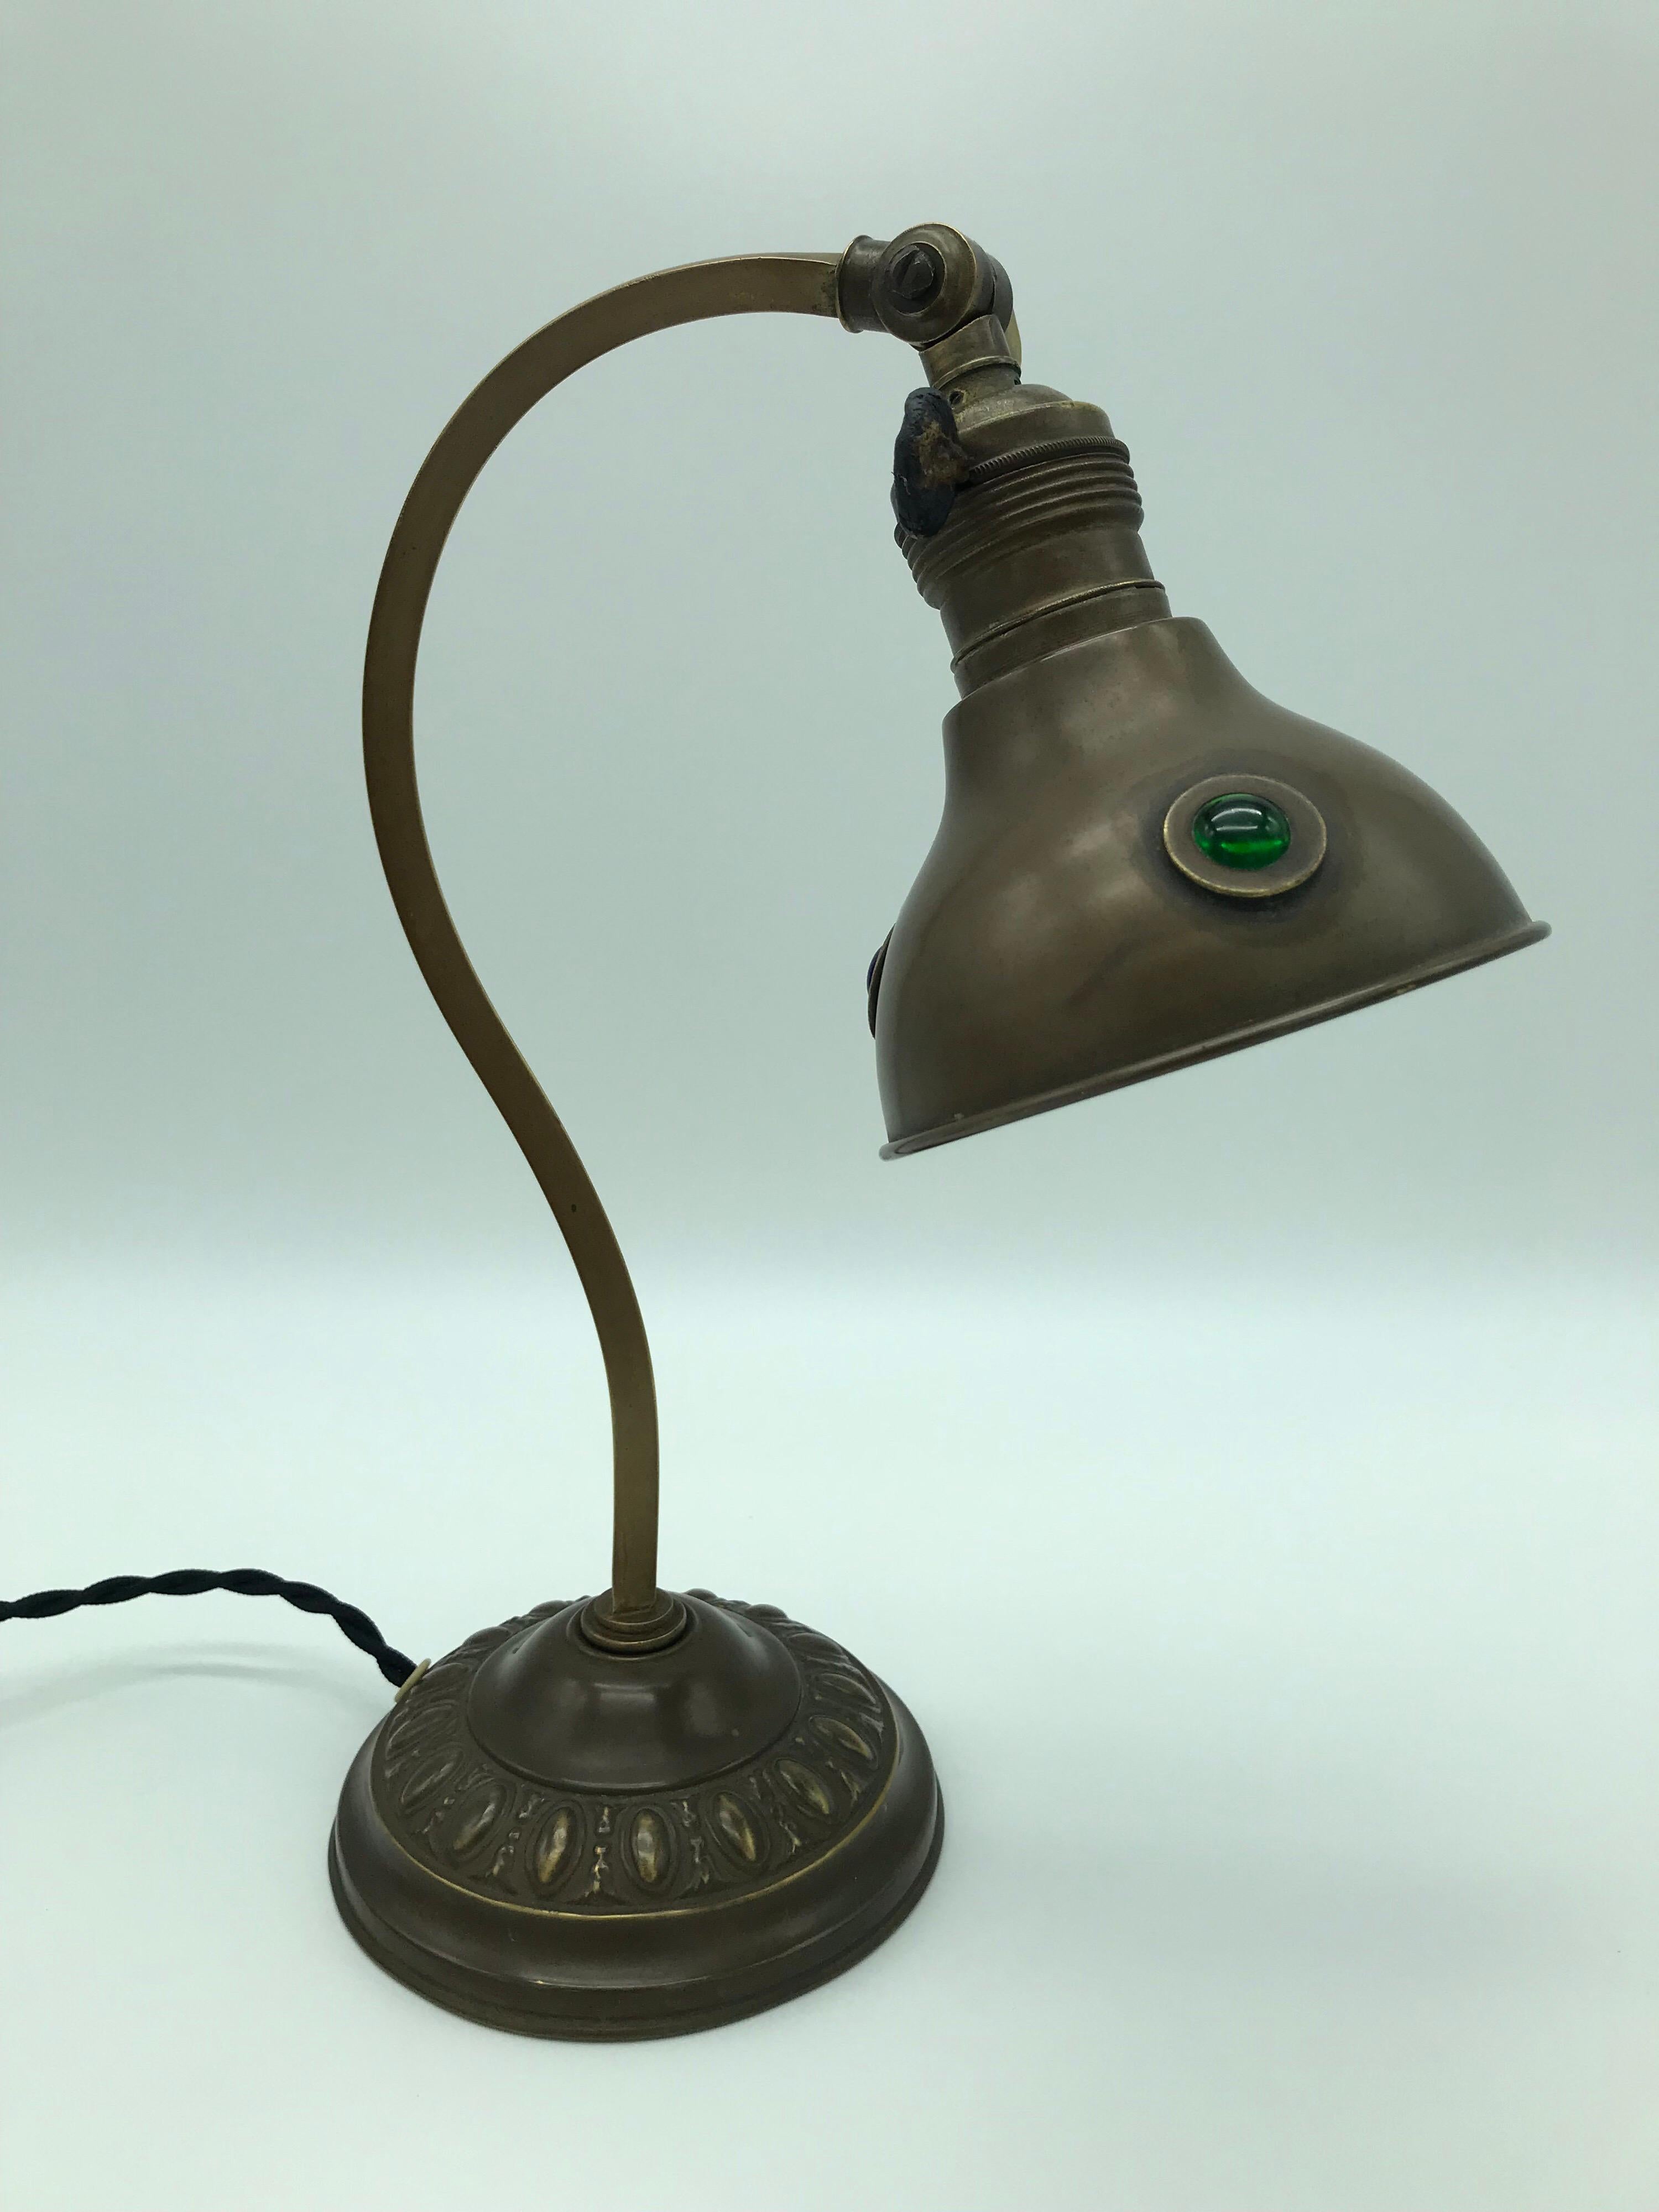 Adorable Art Deco table lamp in copper with inlaid red blue and green glass beads in the shade.
Such a delicately designed table lamp in original condition and with new wiring.
Lovely patina to the copper surface.
One repair to the on/off switch